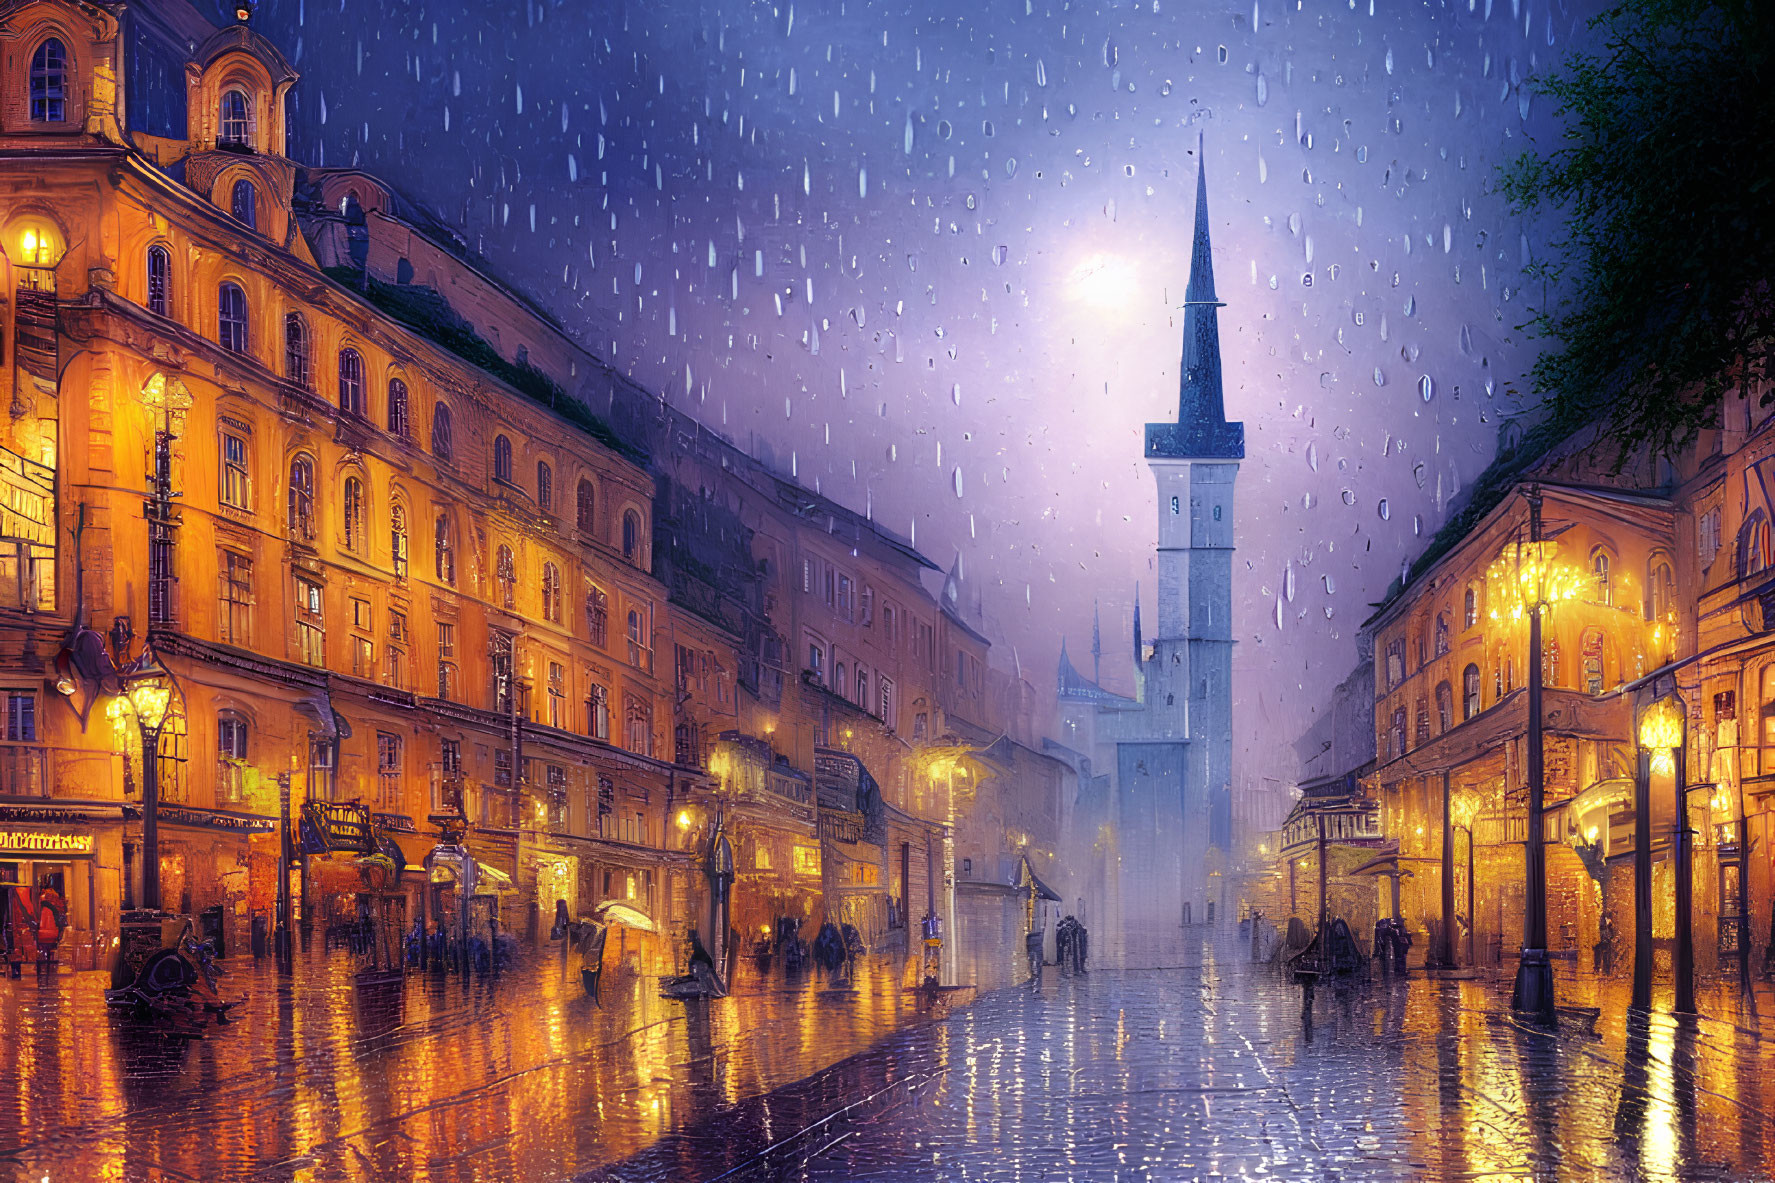 Historic architecture and glowing street lamps on rain-drenched cobblestone street